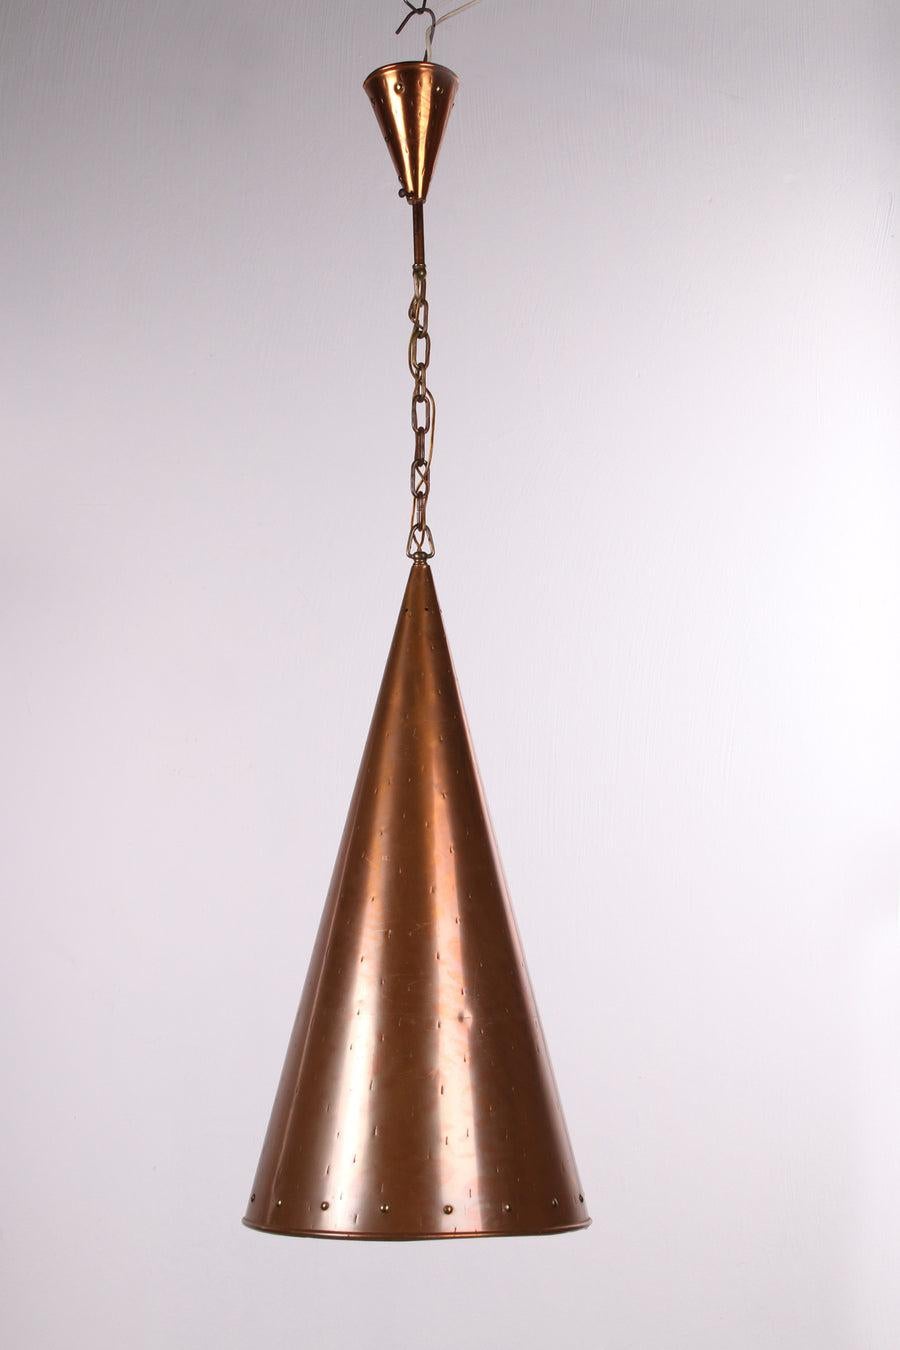 Danish Hand Hammered Copper Pendant Lamp From E.S Horn Aalestrup, 50s

Danish hanging lamp, this lamp is hand-hammered copper from E.S Horn Aalestrup.
Hand-beaten copper gives a craftsmanship to the hanging lamp. The cable is ''hidden'' in the metal